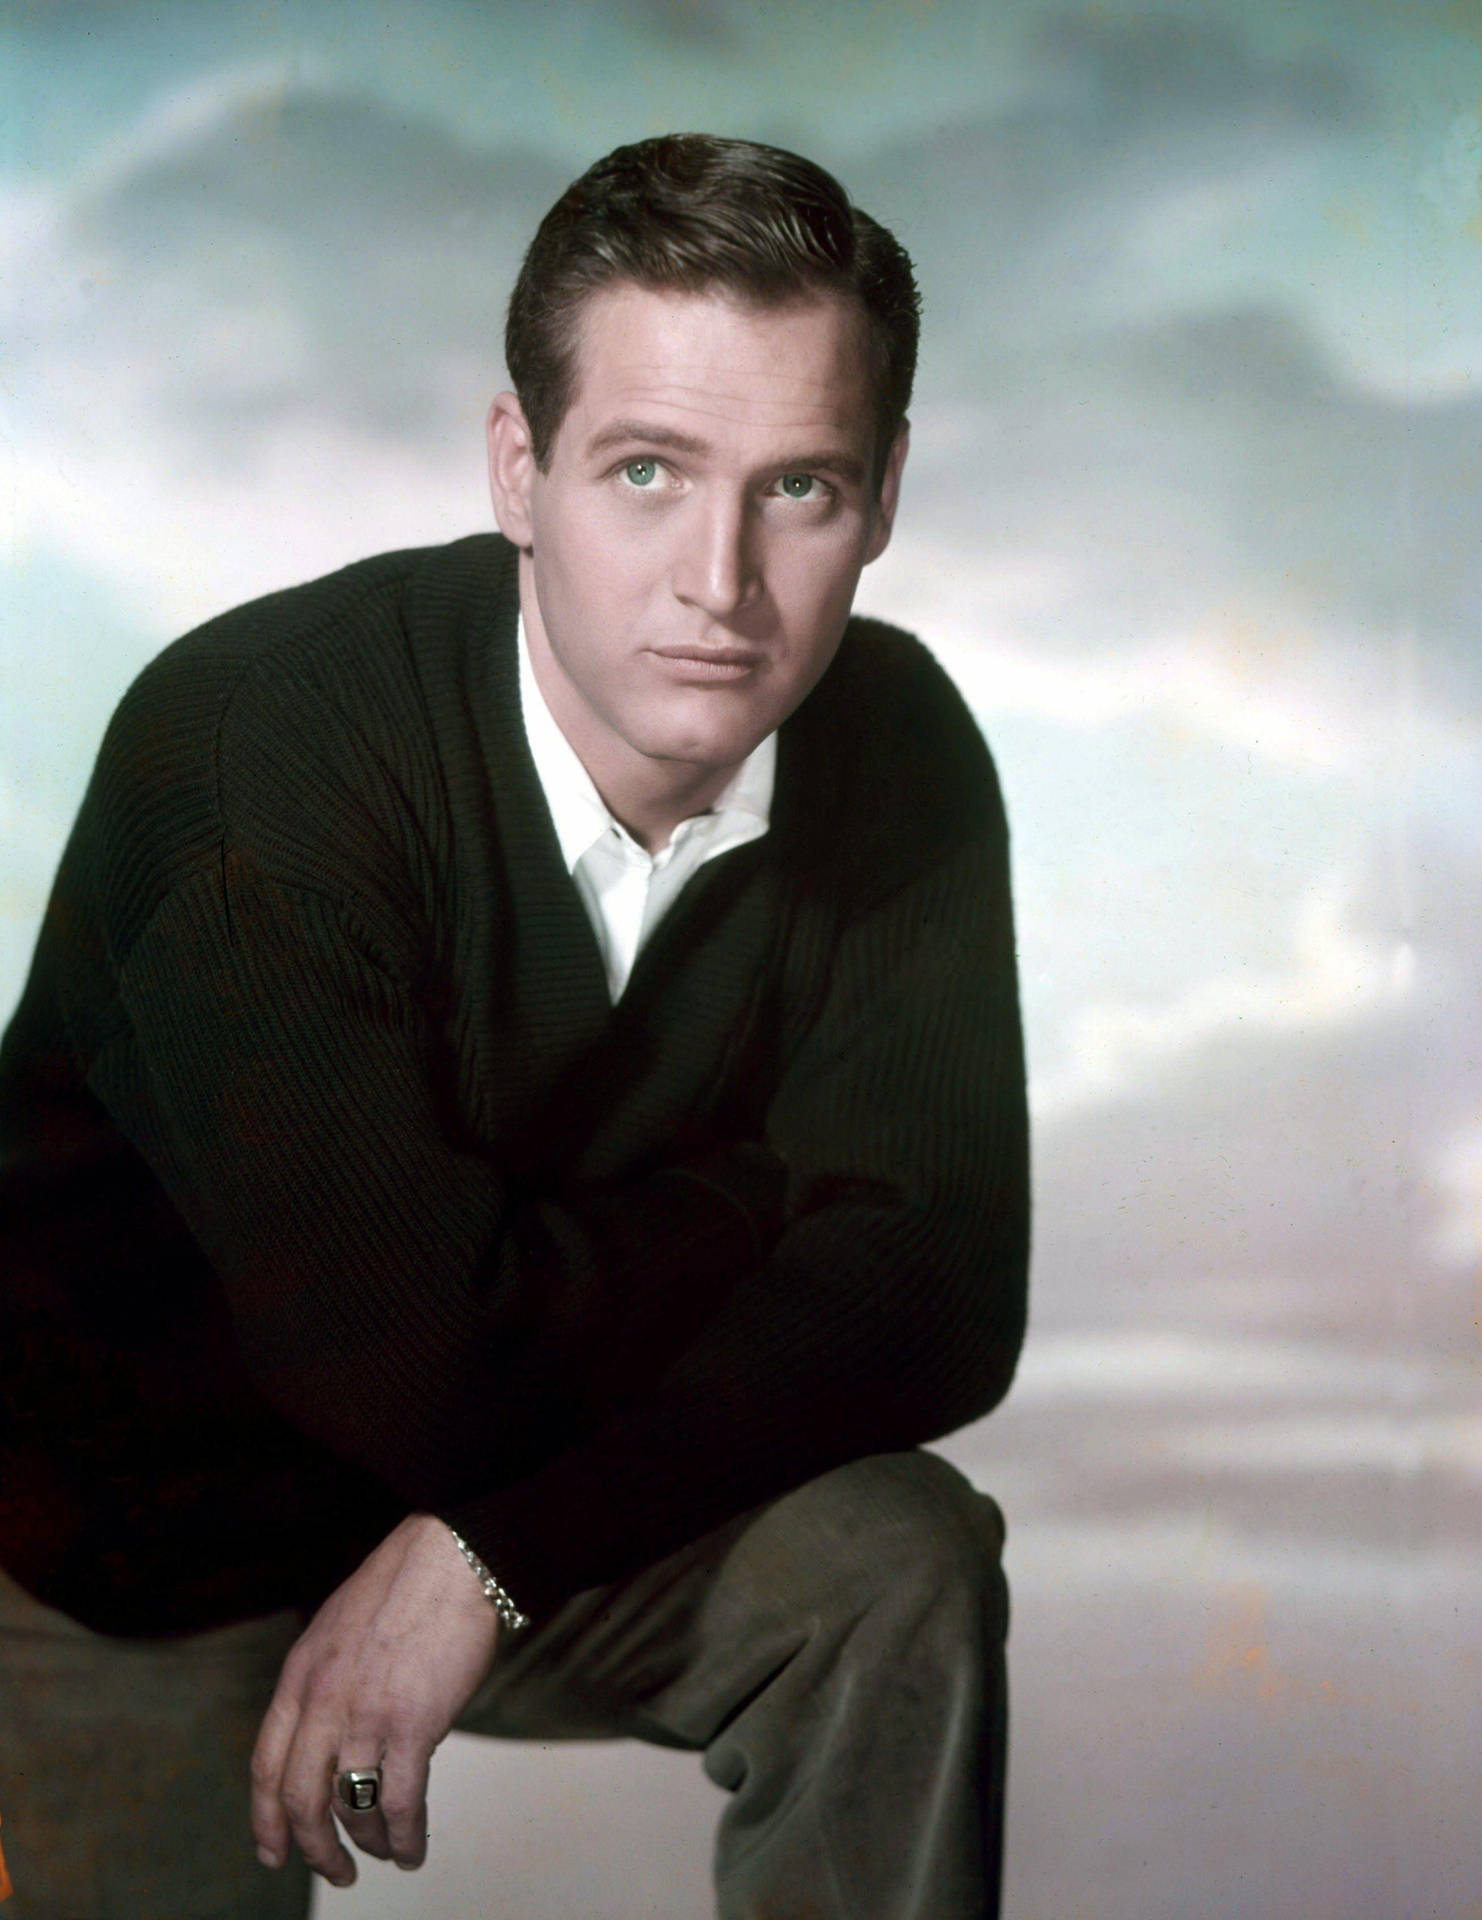 Hollywood Legend Paul Newman In Studio Shoot Background